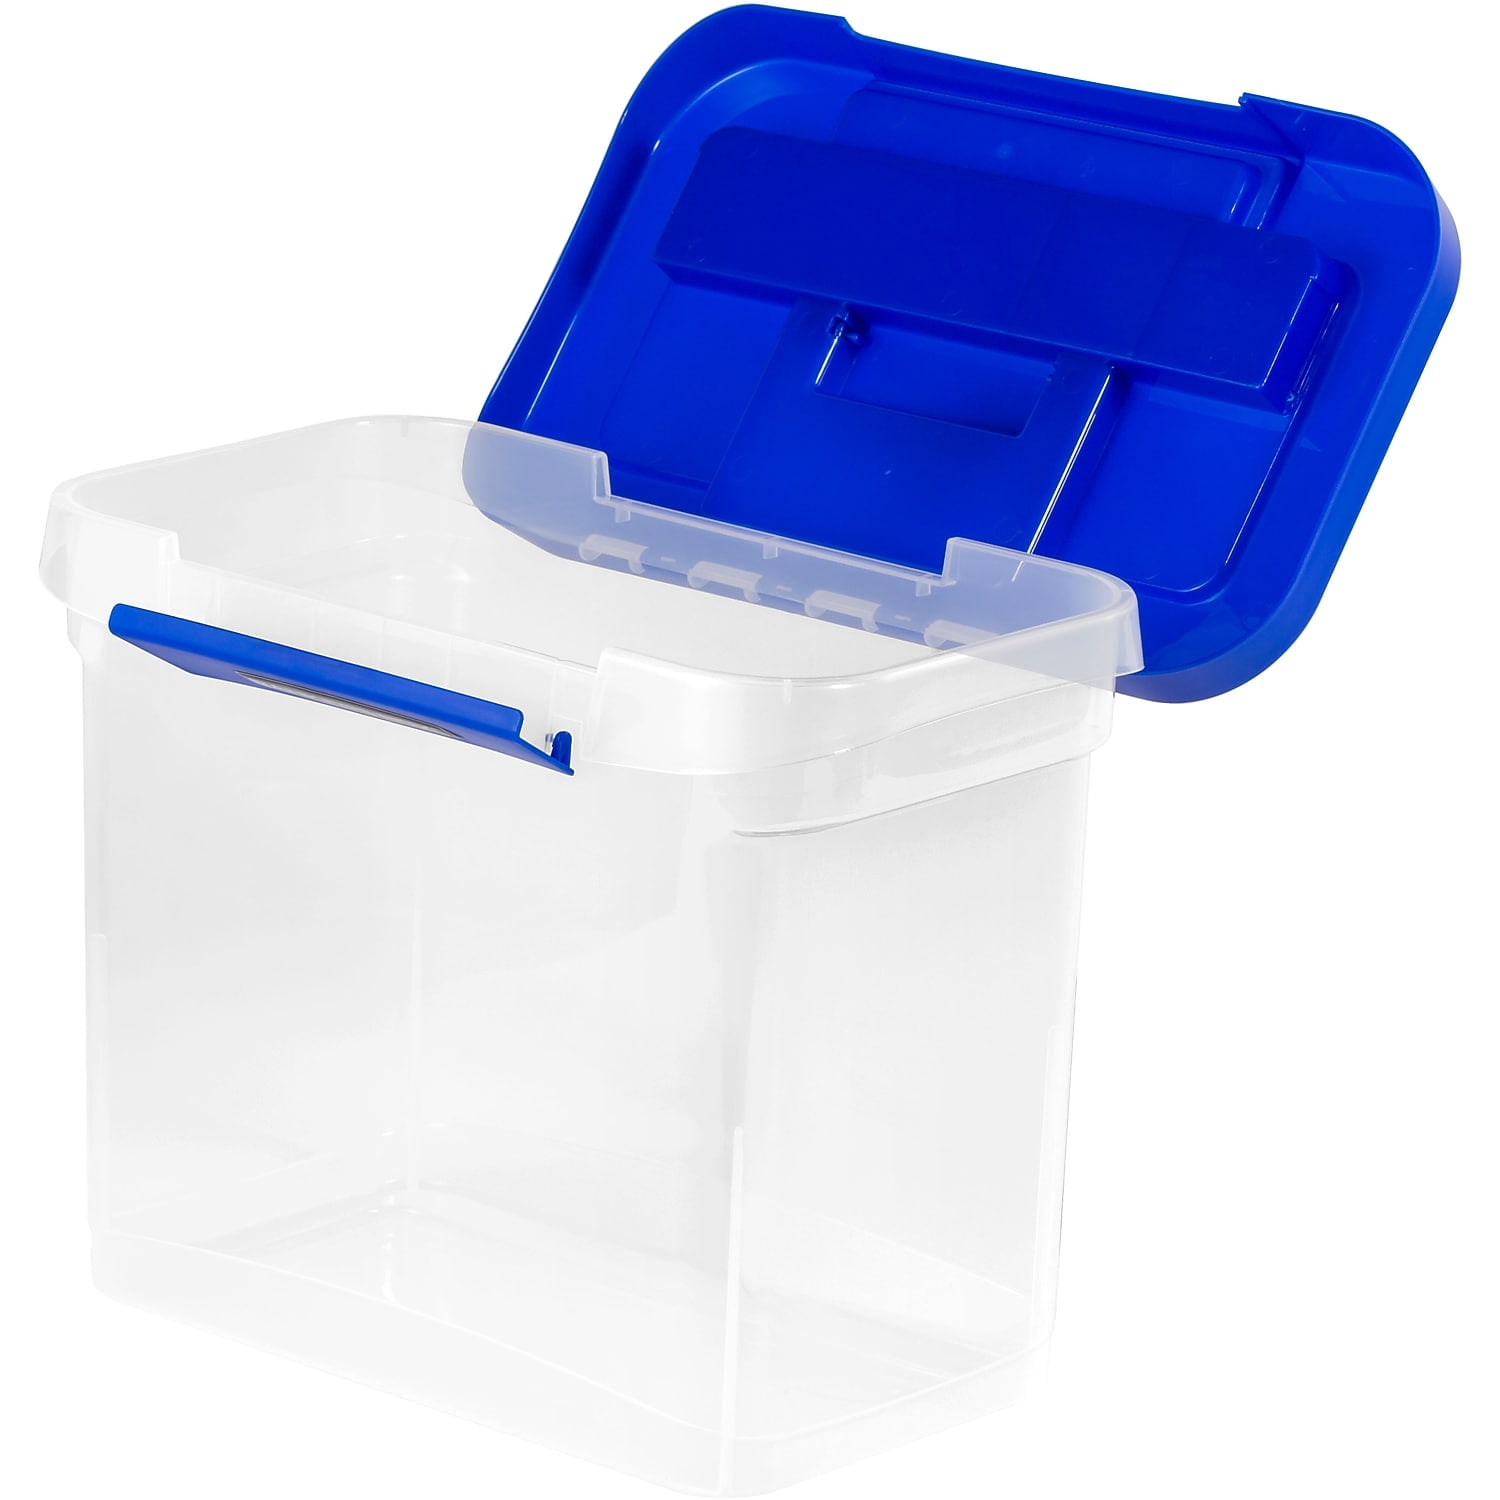 Bankers Box Plastic Storage Box 1L, Ideal for organizing